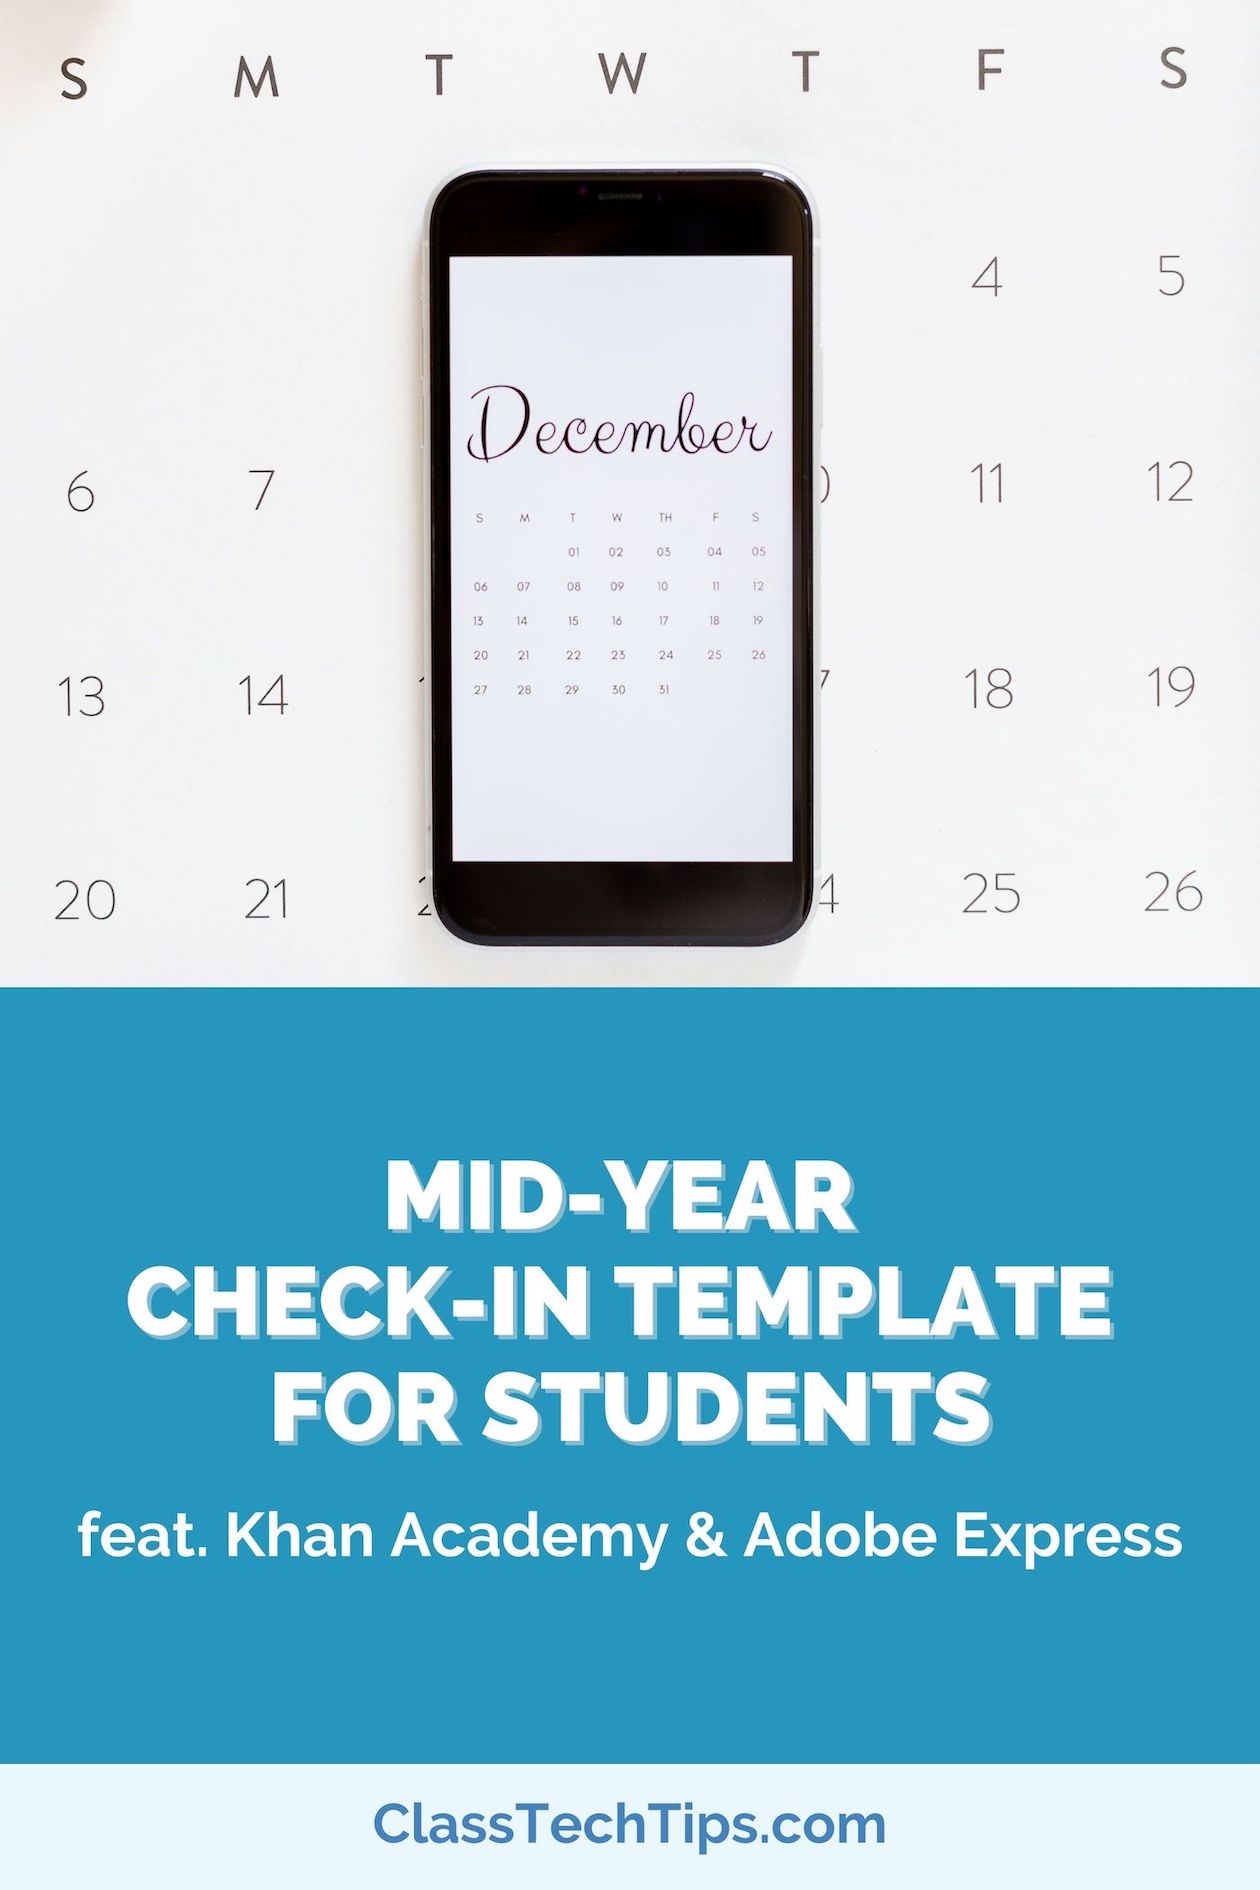 Mid-Year Check-In Template for Students